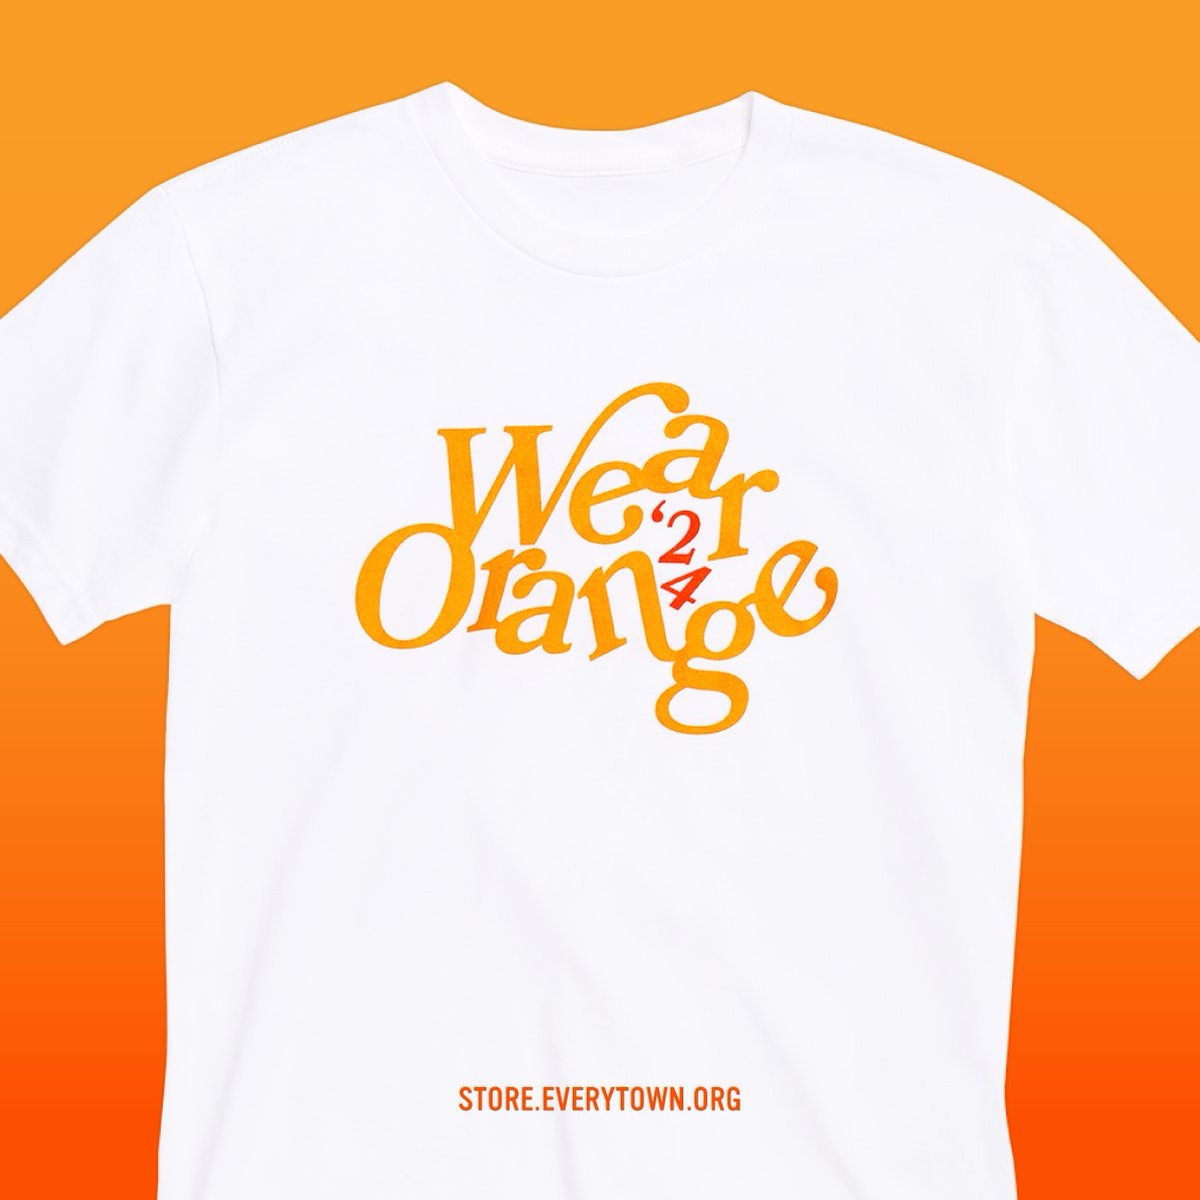 National Gun Violence Awareness Day is June 7th. Join people across the country in wearing orange & spreading awareness about our nation’s gun violence crisis that steals more than 120 lives and wounds over 200 more every day. Shop new #WearOrange merch: store.everytown.org/collections/we…